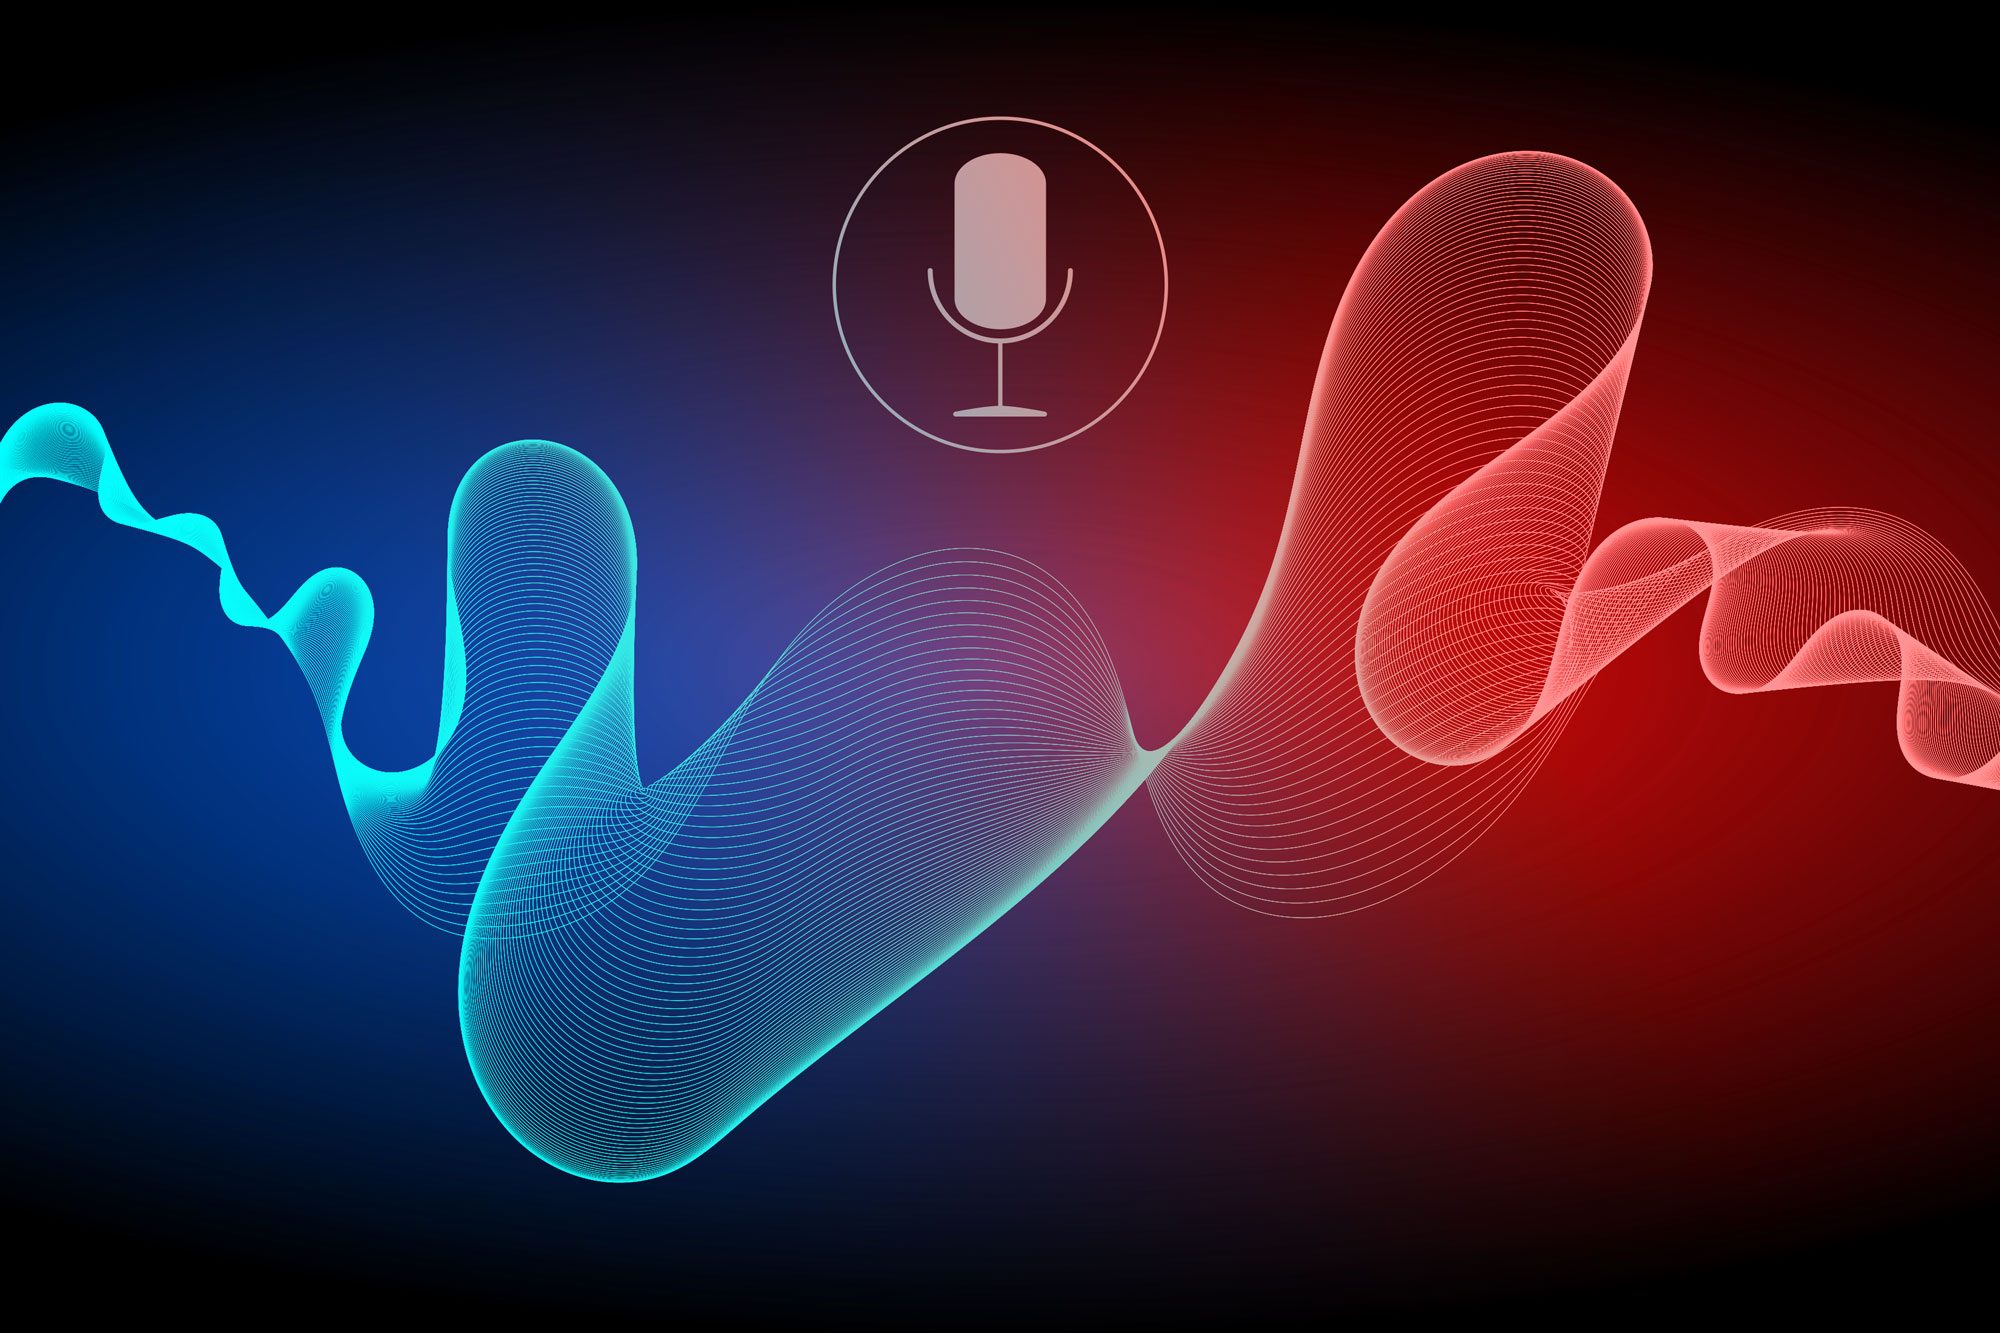 Voice Recognition symbol With A Microphone And Soundwaves that go from blue to red